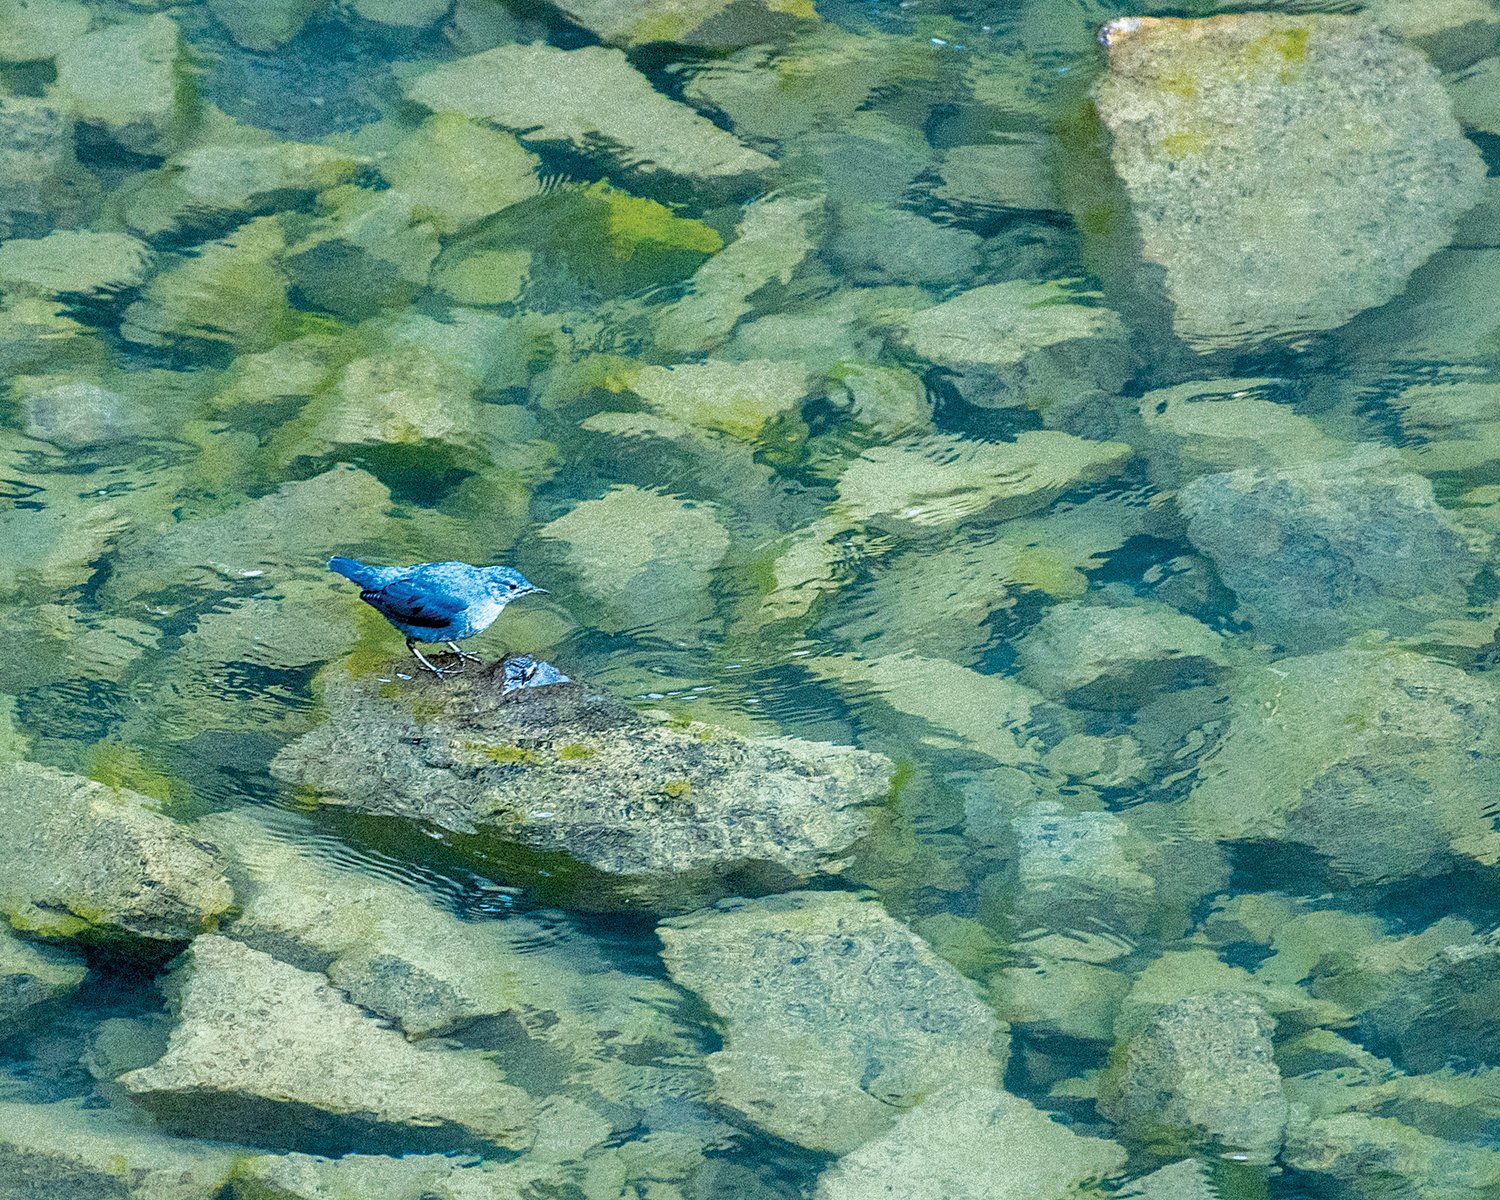 A bird stands on rocks in the water near Packwood Lake on Wednesday.